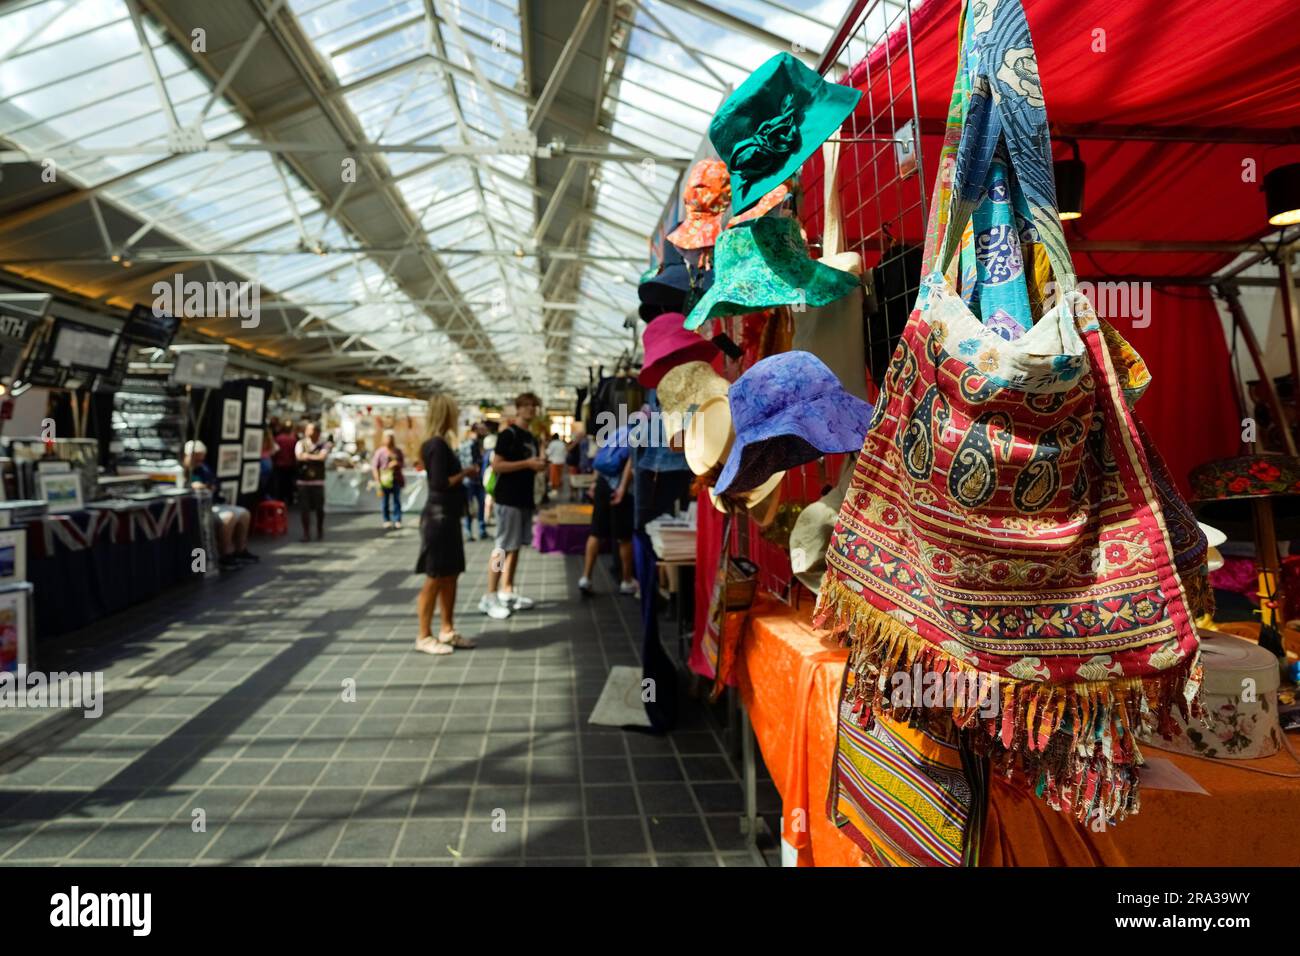 People shopping at Greenwich Market in downtown Greenwich, London. Bags, hats and other goods hang from the retail stalls of this popular city market. Stock Photo